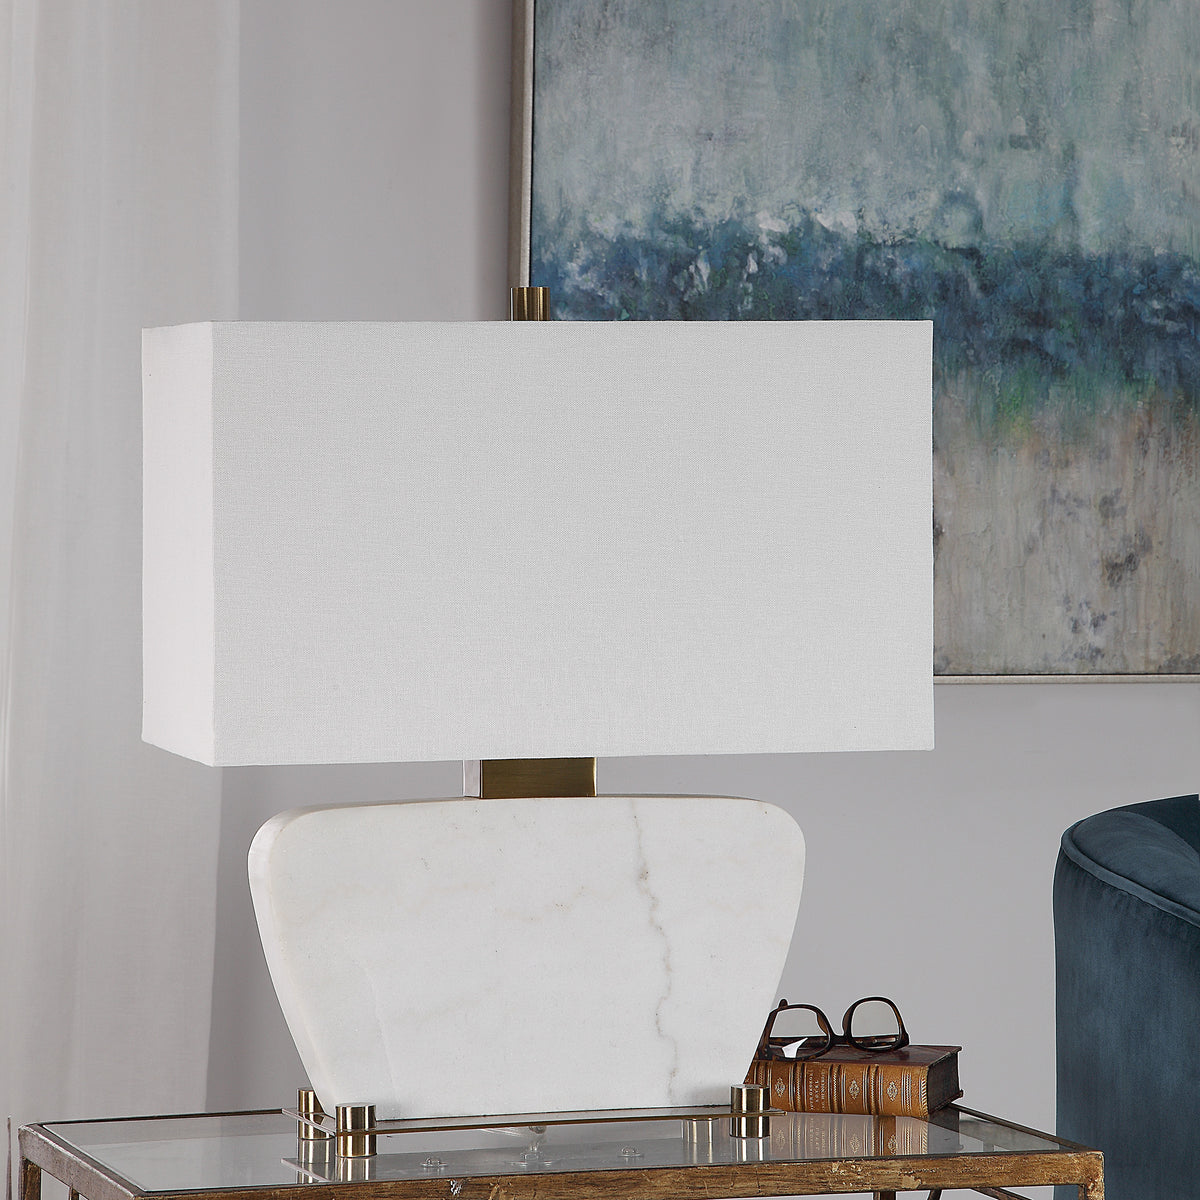 Uttermost Genessy White Marble Table Lamp